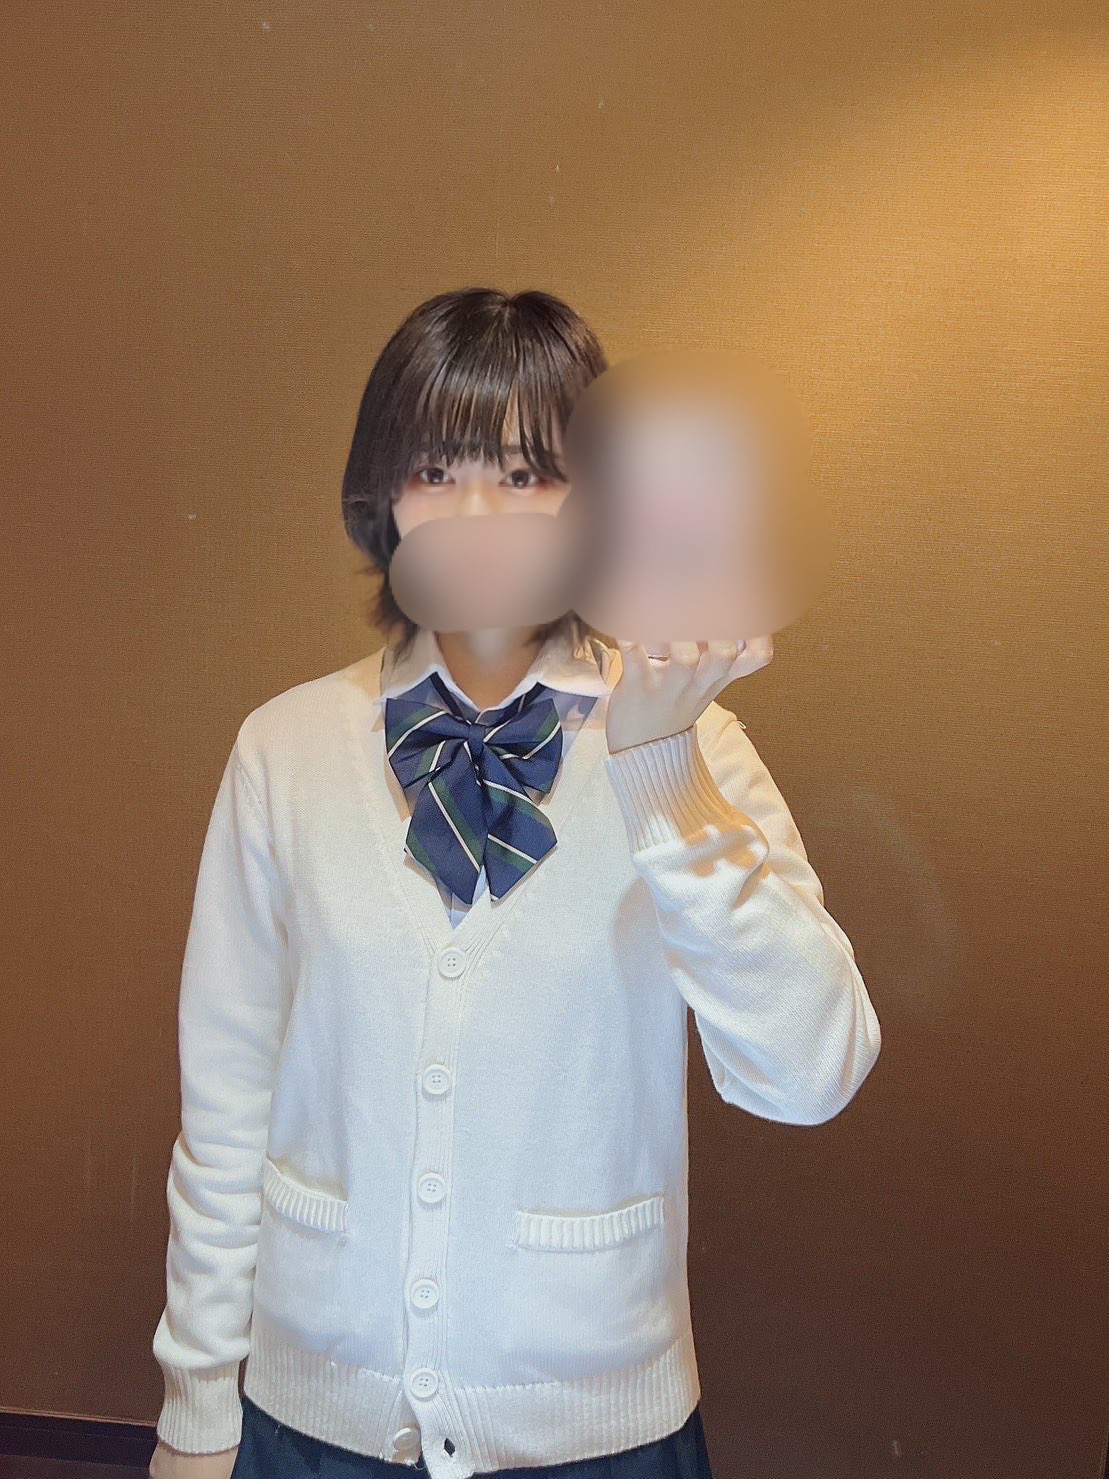 Complete appearance SS class Prefectural 2 full-time school Born in 2005 D cup Pure white smooth skin and a style that puts the model to shame We will deliver the finest beautiful girl